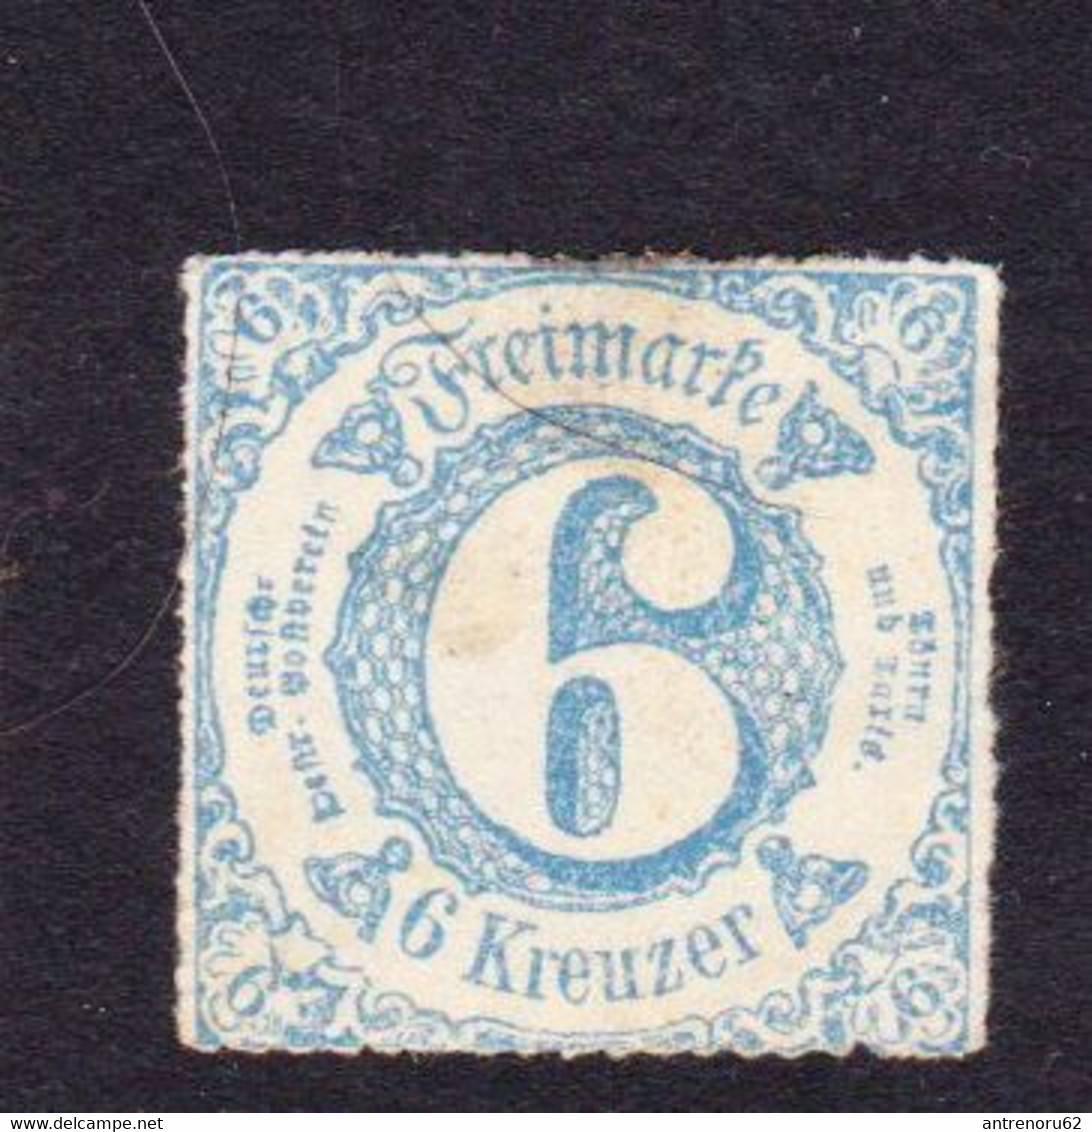 STAMPS-THURN-AND-TAXIS-1865-UNUSED-MH*-SEE-SCAN - Postfris